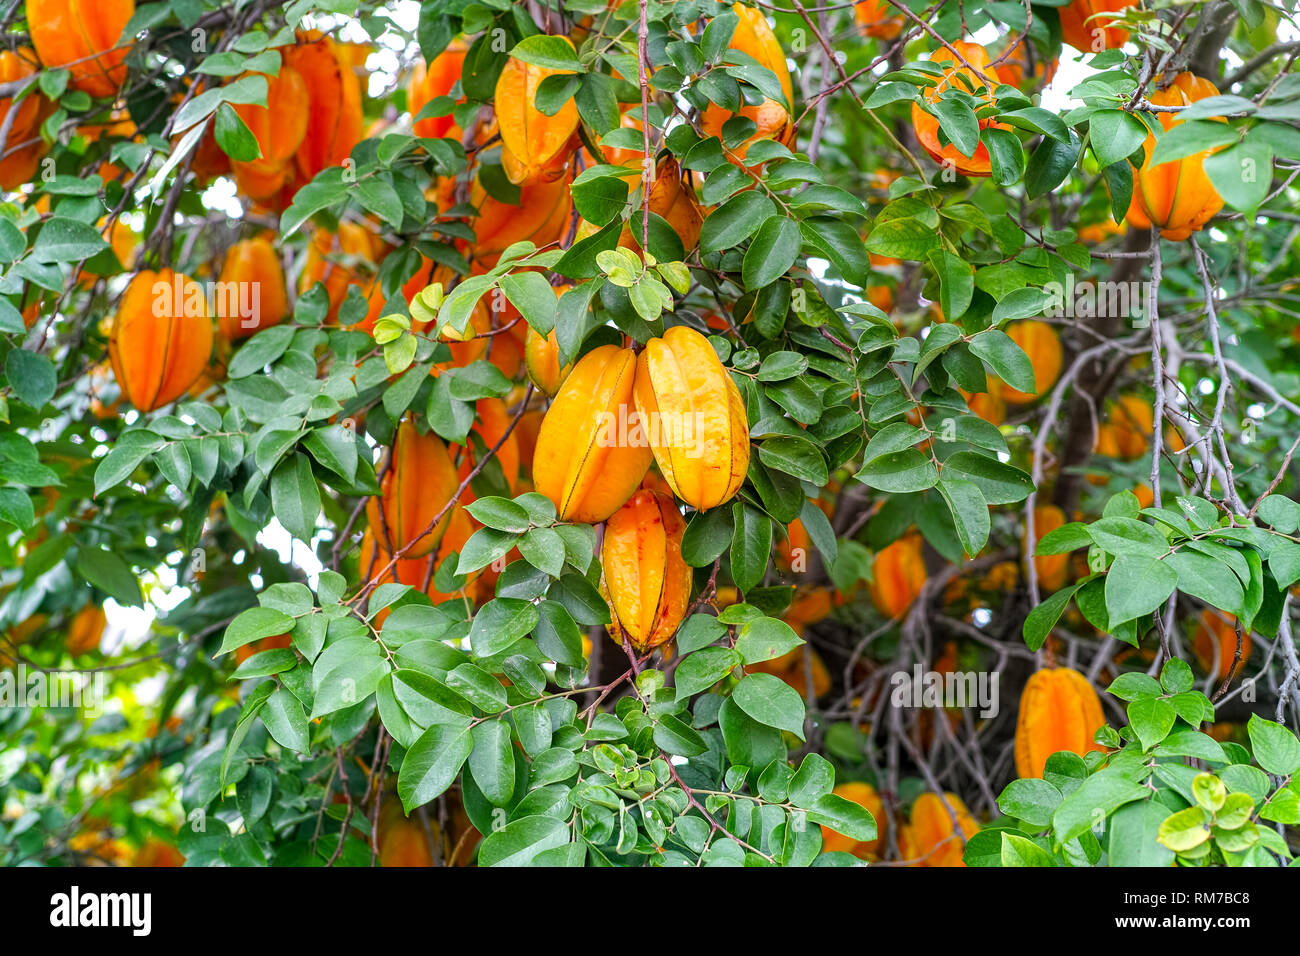 Ripe orange averrhoa carambola or star fruits growing on tree in tropical climate, ready for harvest Stock Photo